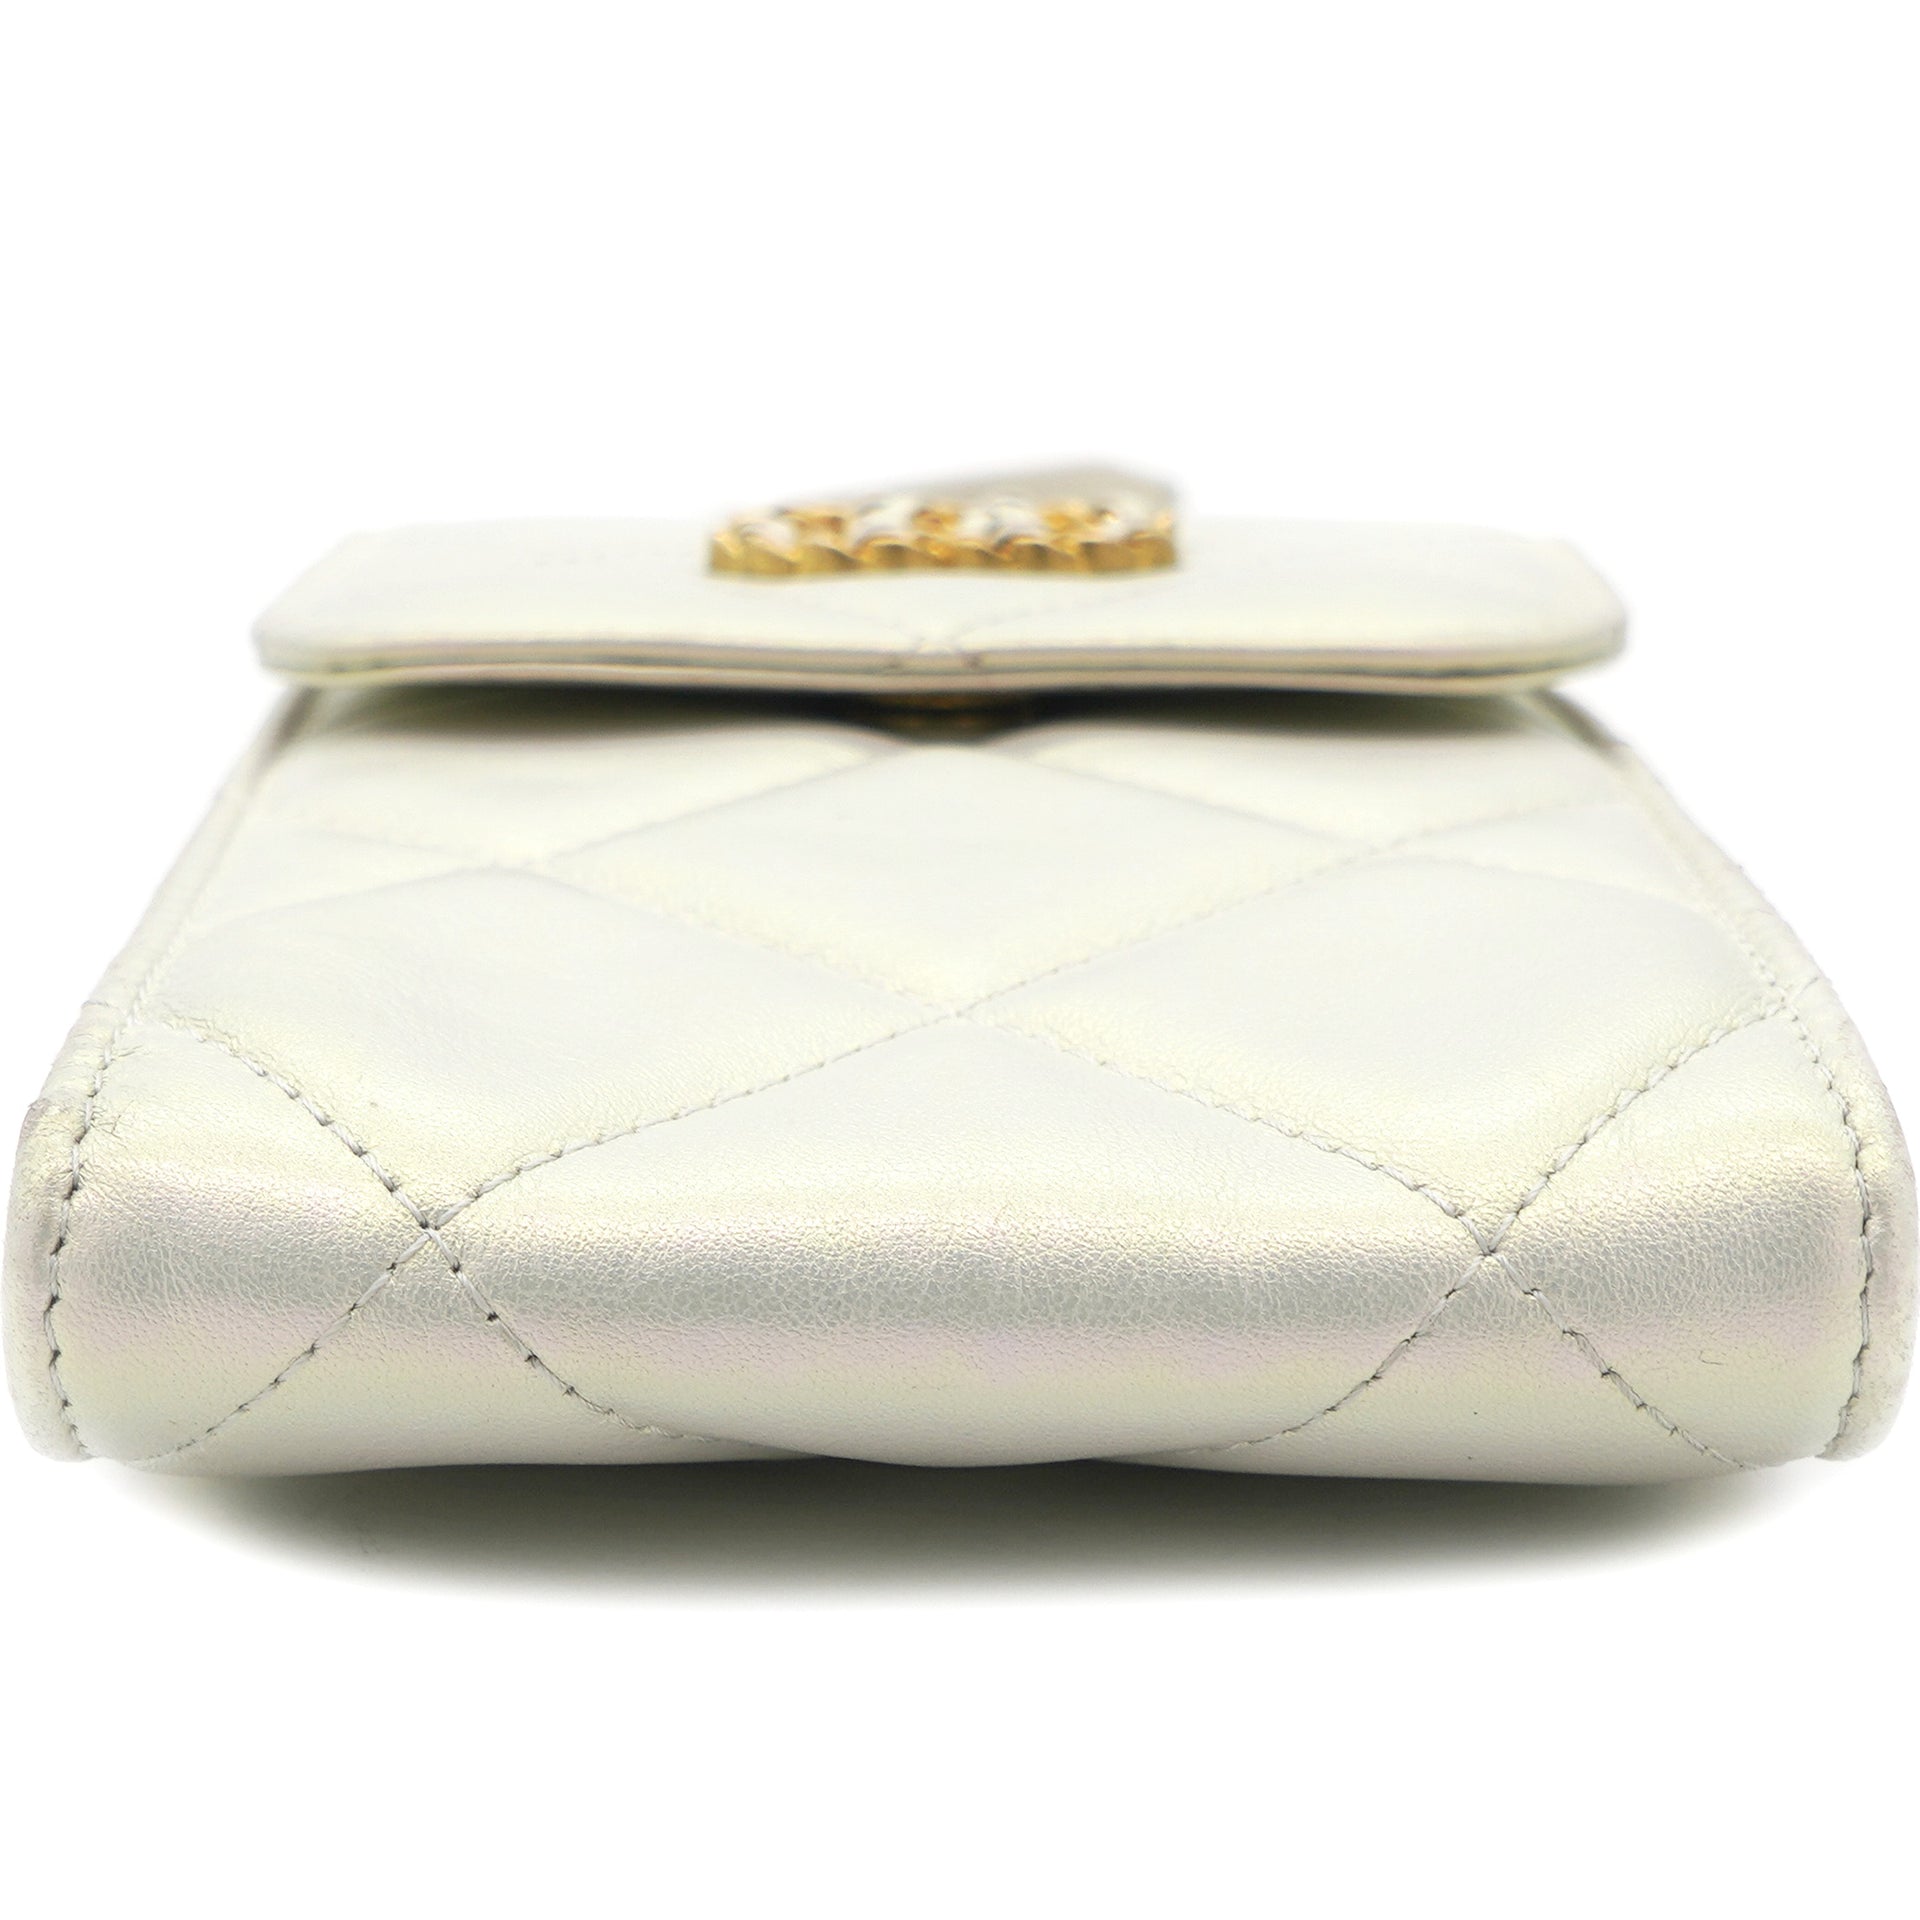 Phone Holder Chanel 19 Pearly White Calfskin